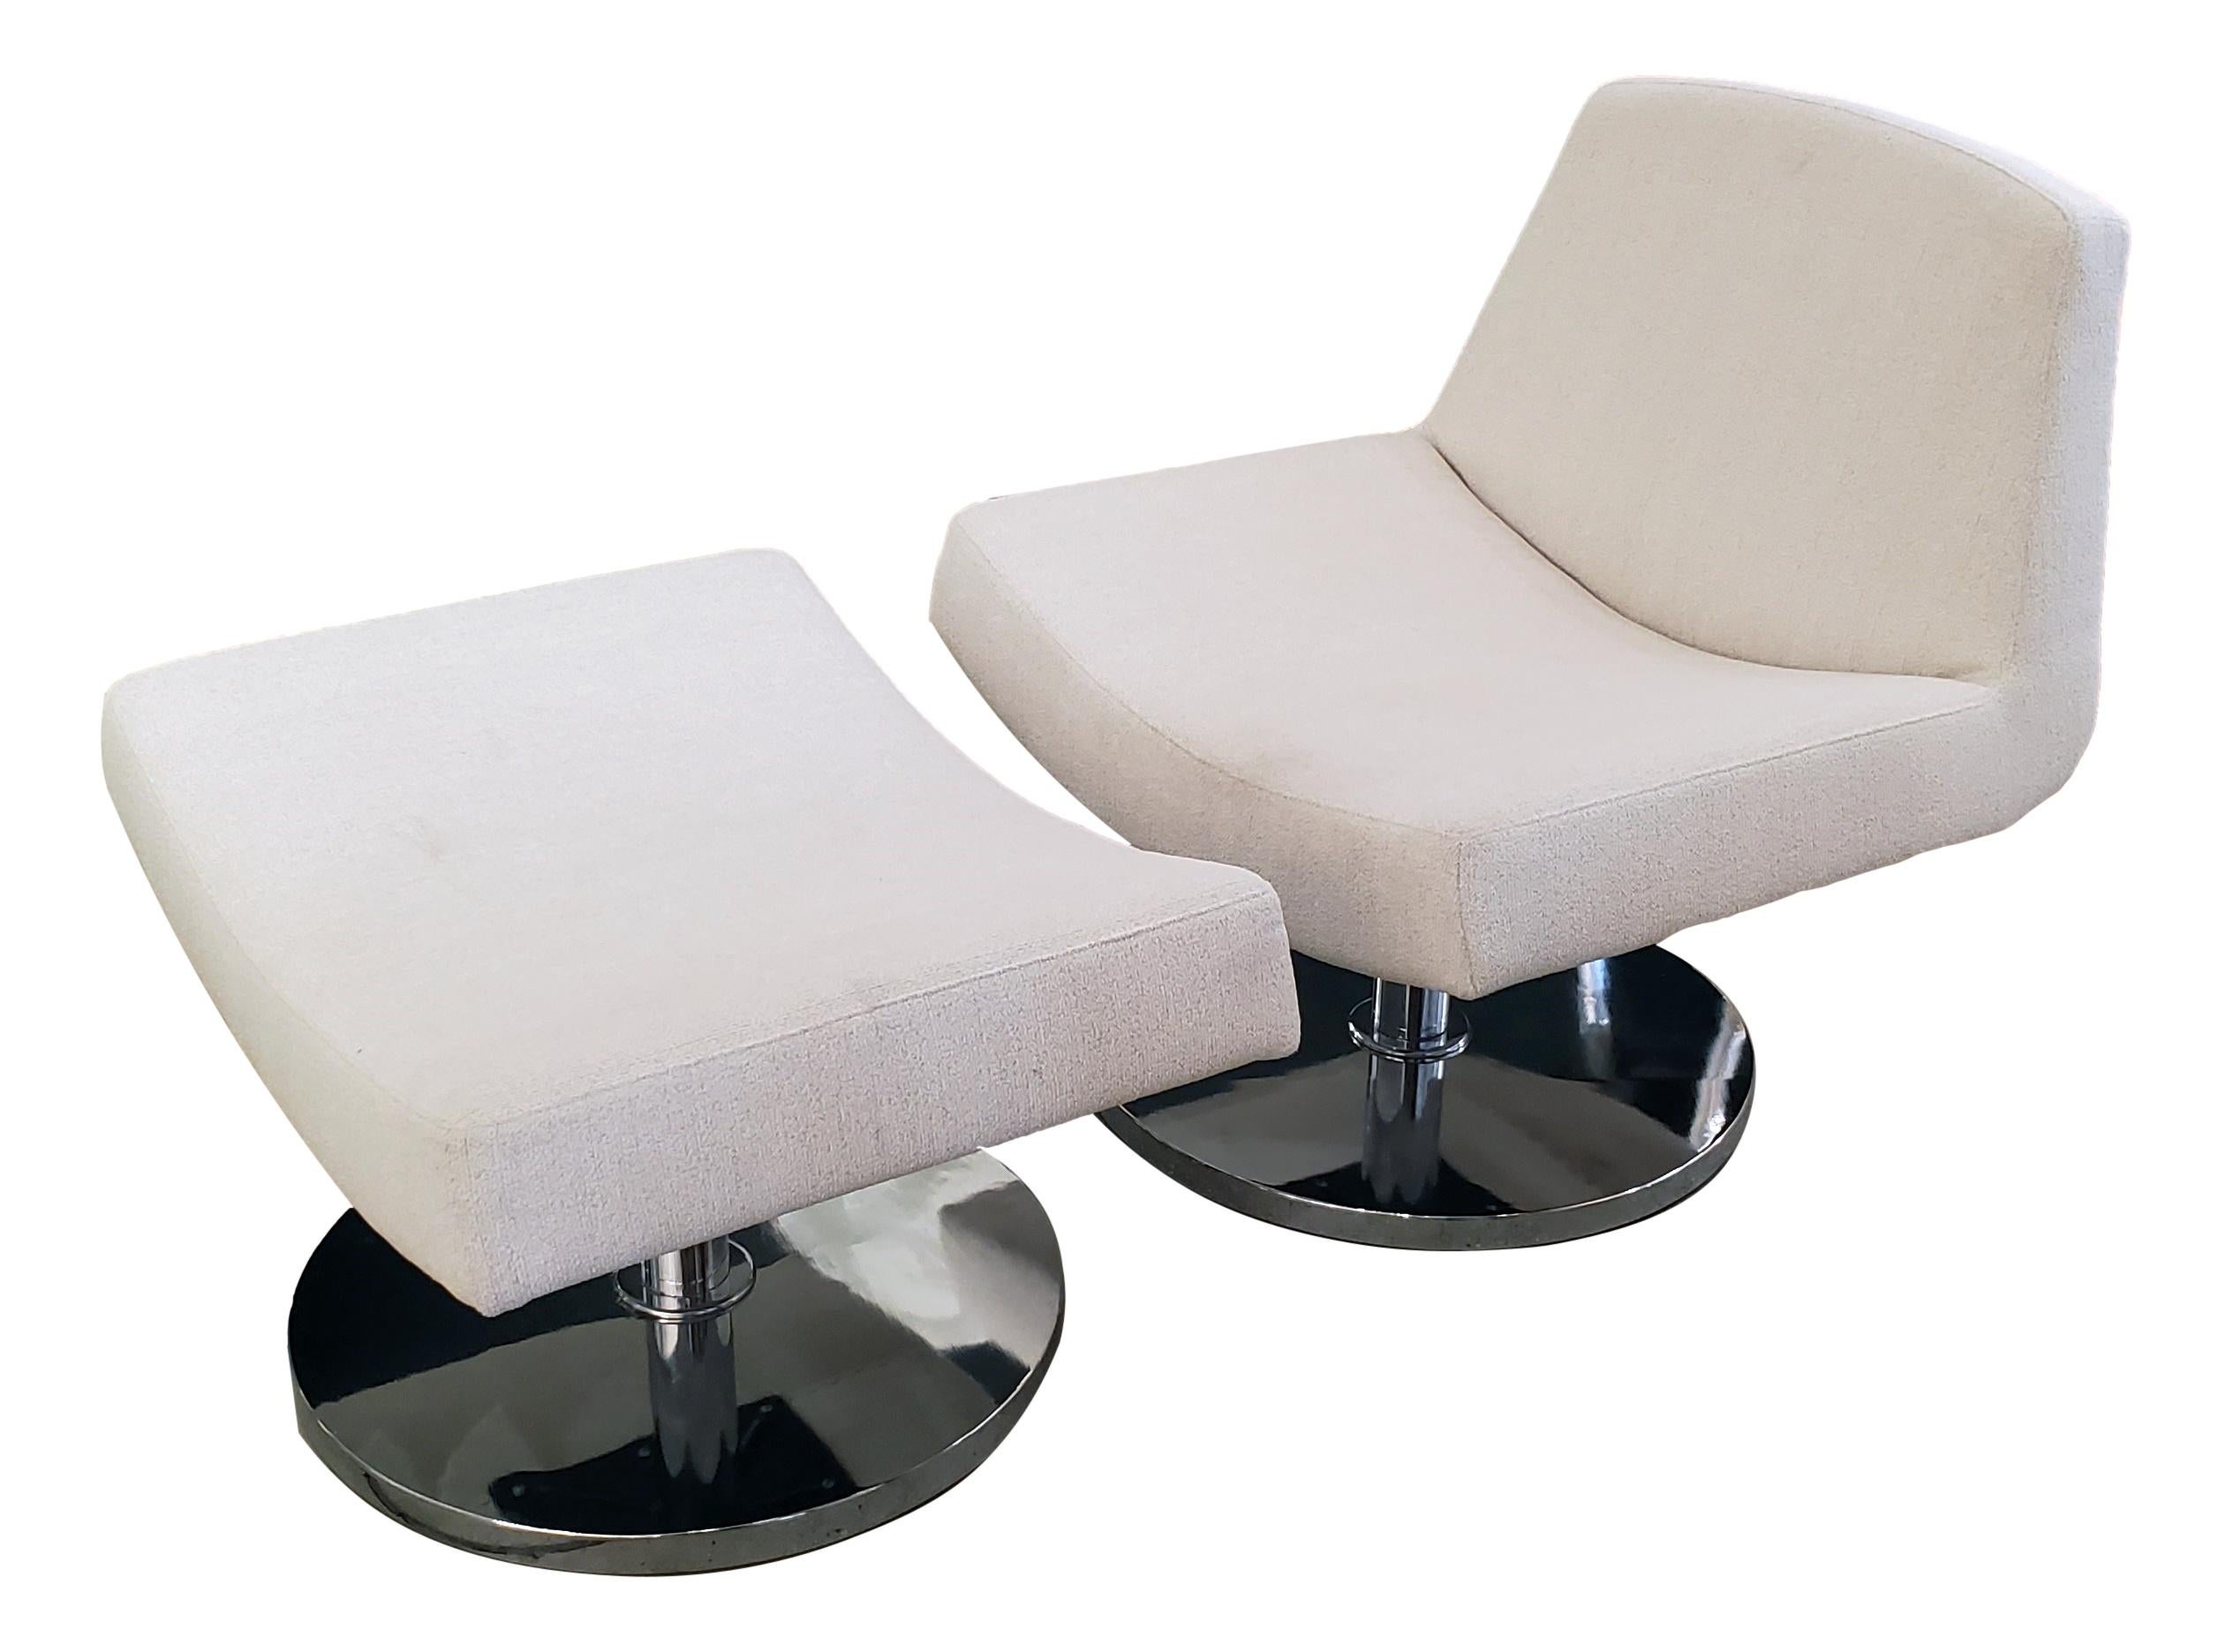 Swivel chair and ottoman by Goodman Charlton.  
Frame: Select hardwood and industrial grade plywood cover with polyurethane foam and polyester fiber.
Suspension: 3” unidirectional webbing.
Cushions:  Seat & back; multiple density/IFD polyurethane